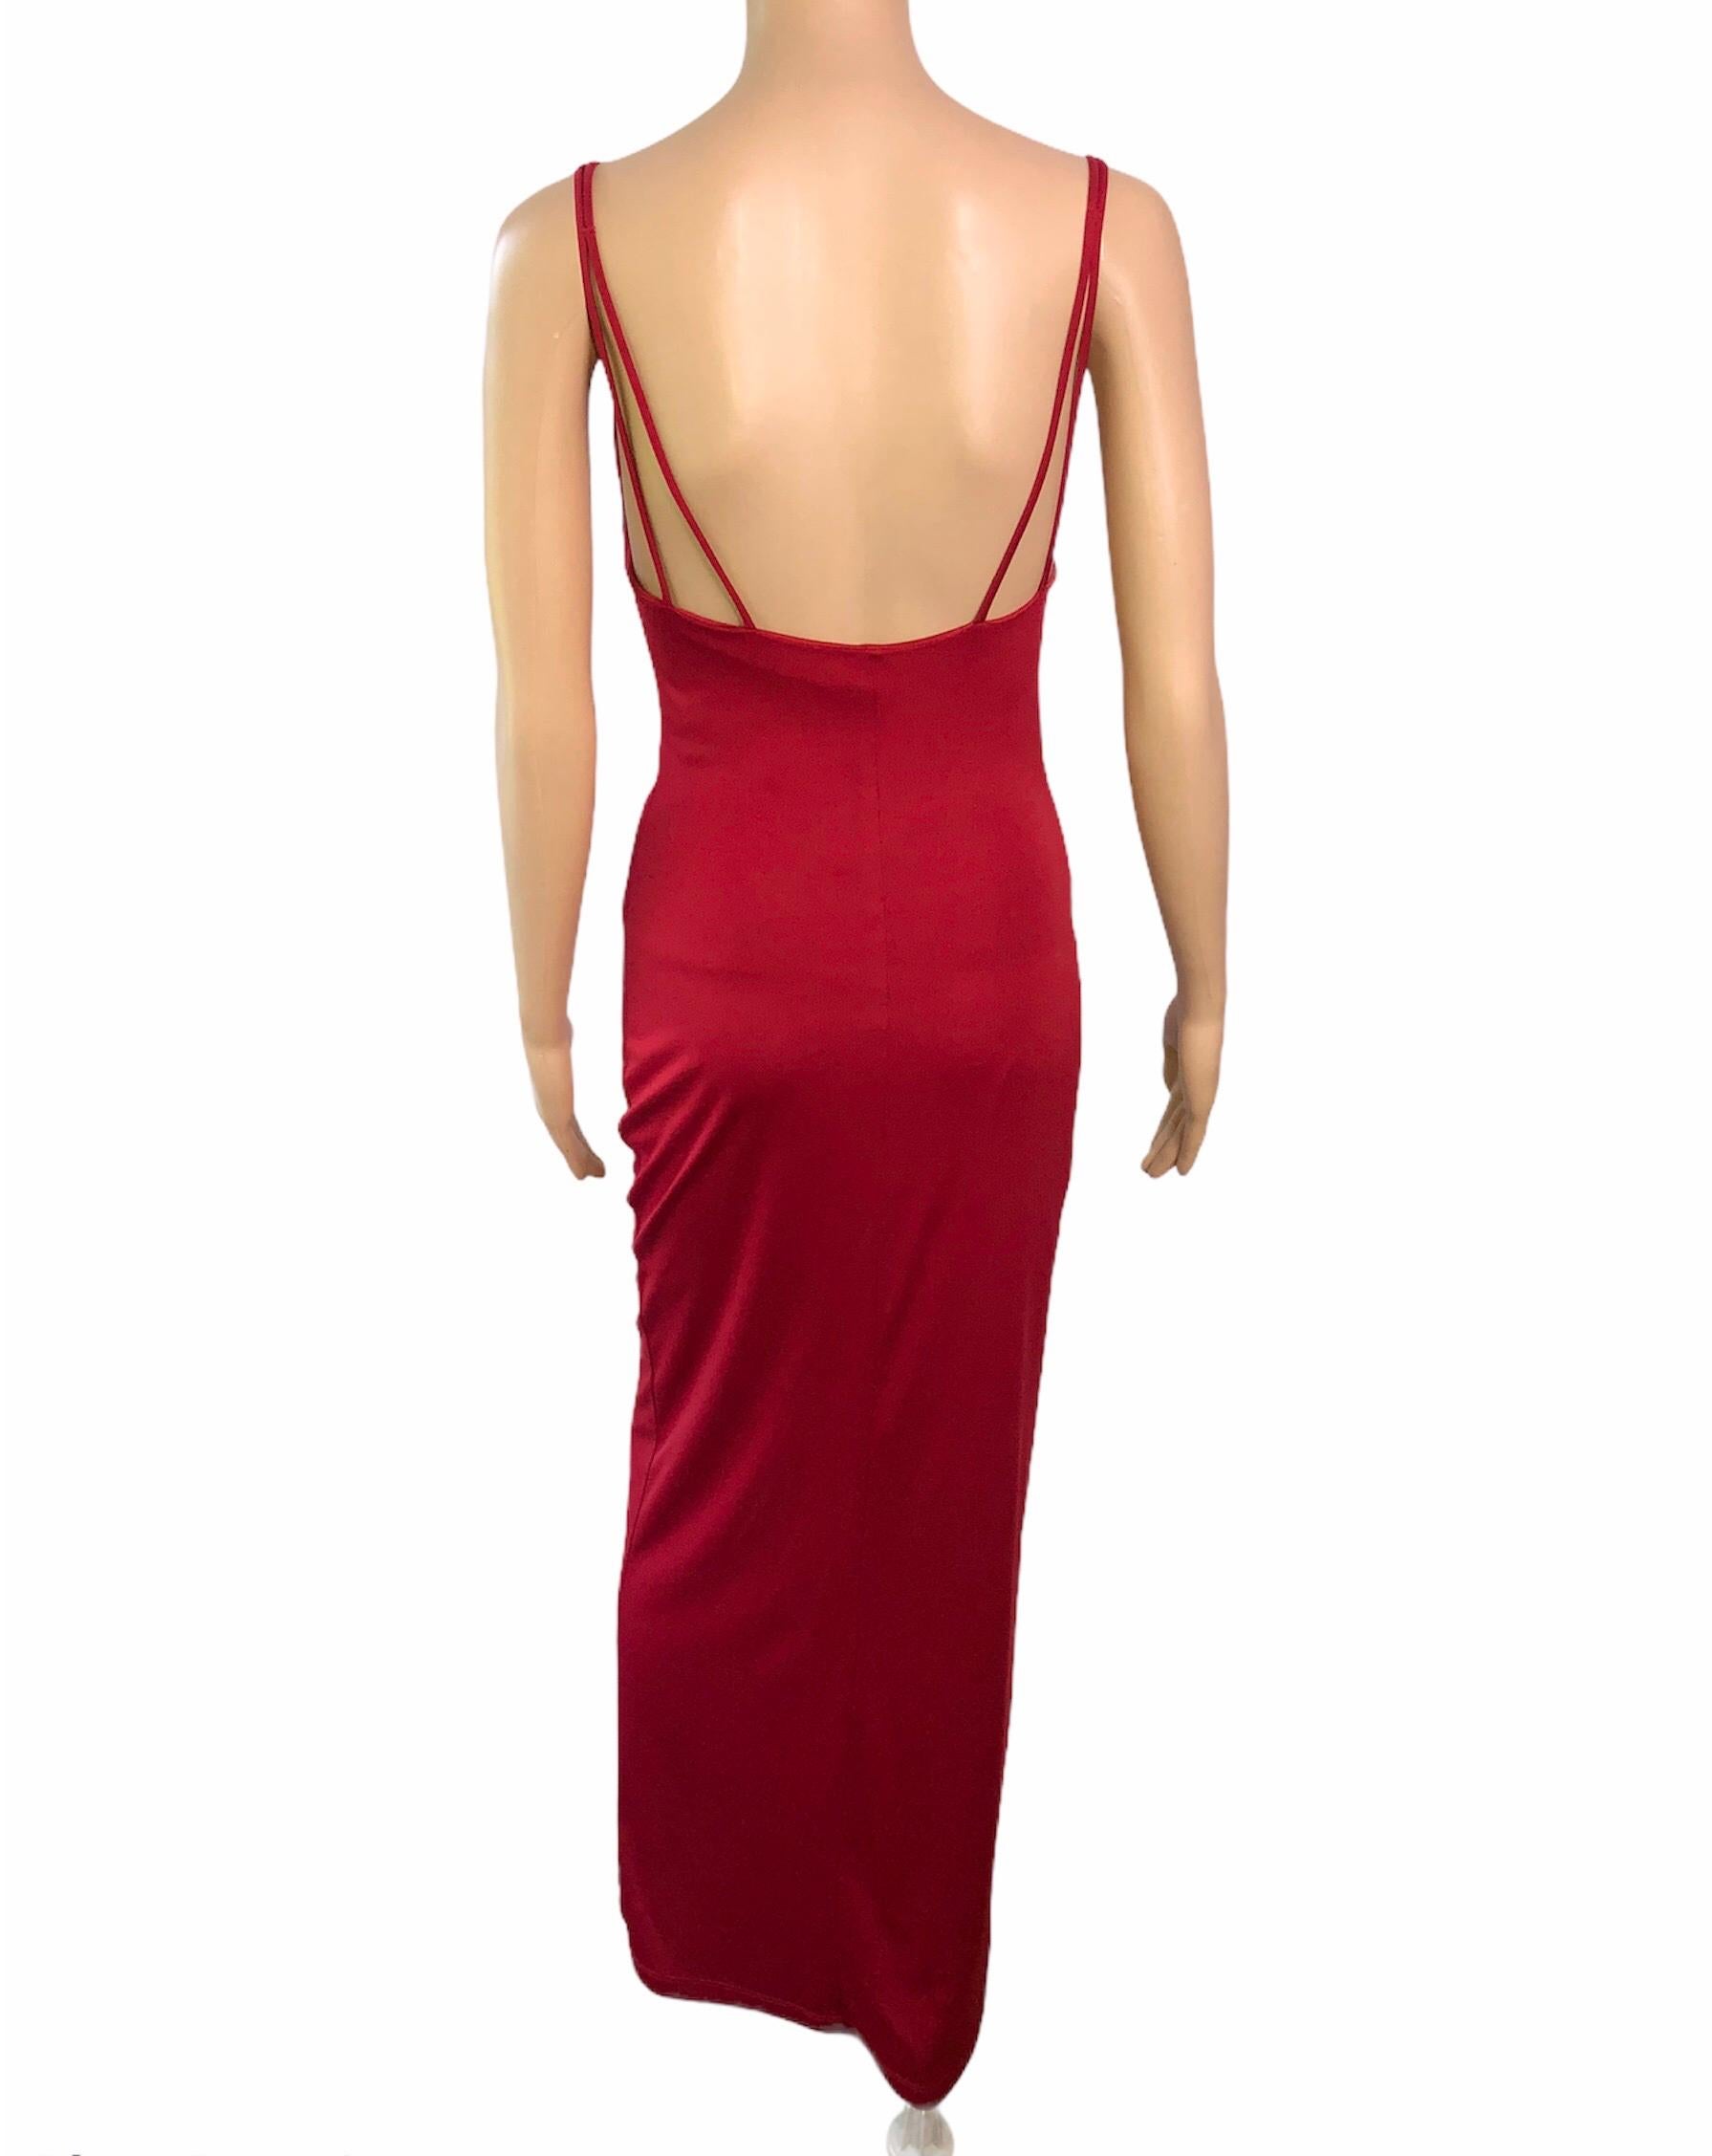 Gianni Versace 1990's Vintage Embellished Sheer Panel Red Evening Dress Gown

Gianni Versace red evening dress featuring sheer front panel, embellishments, and front high slit. Please note size and fabric tags are missing.